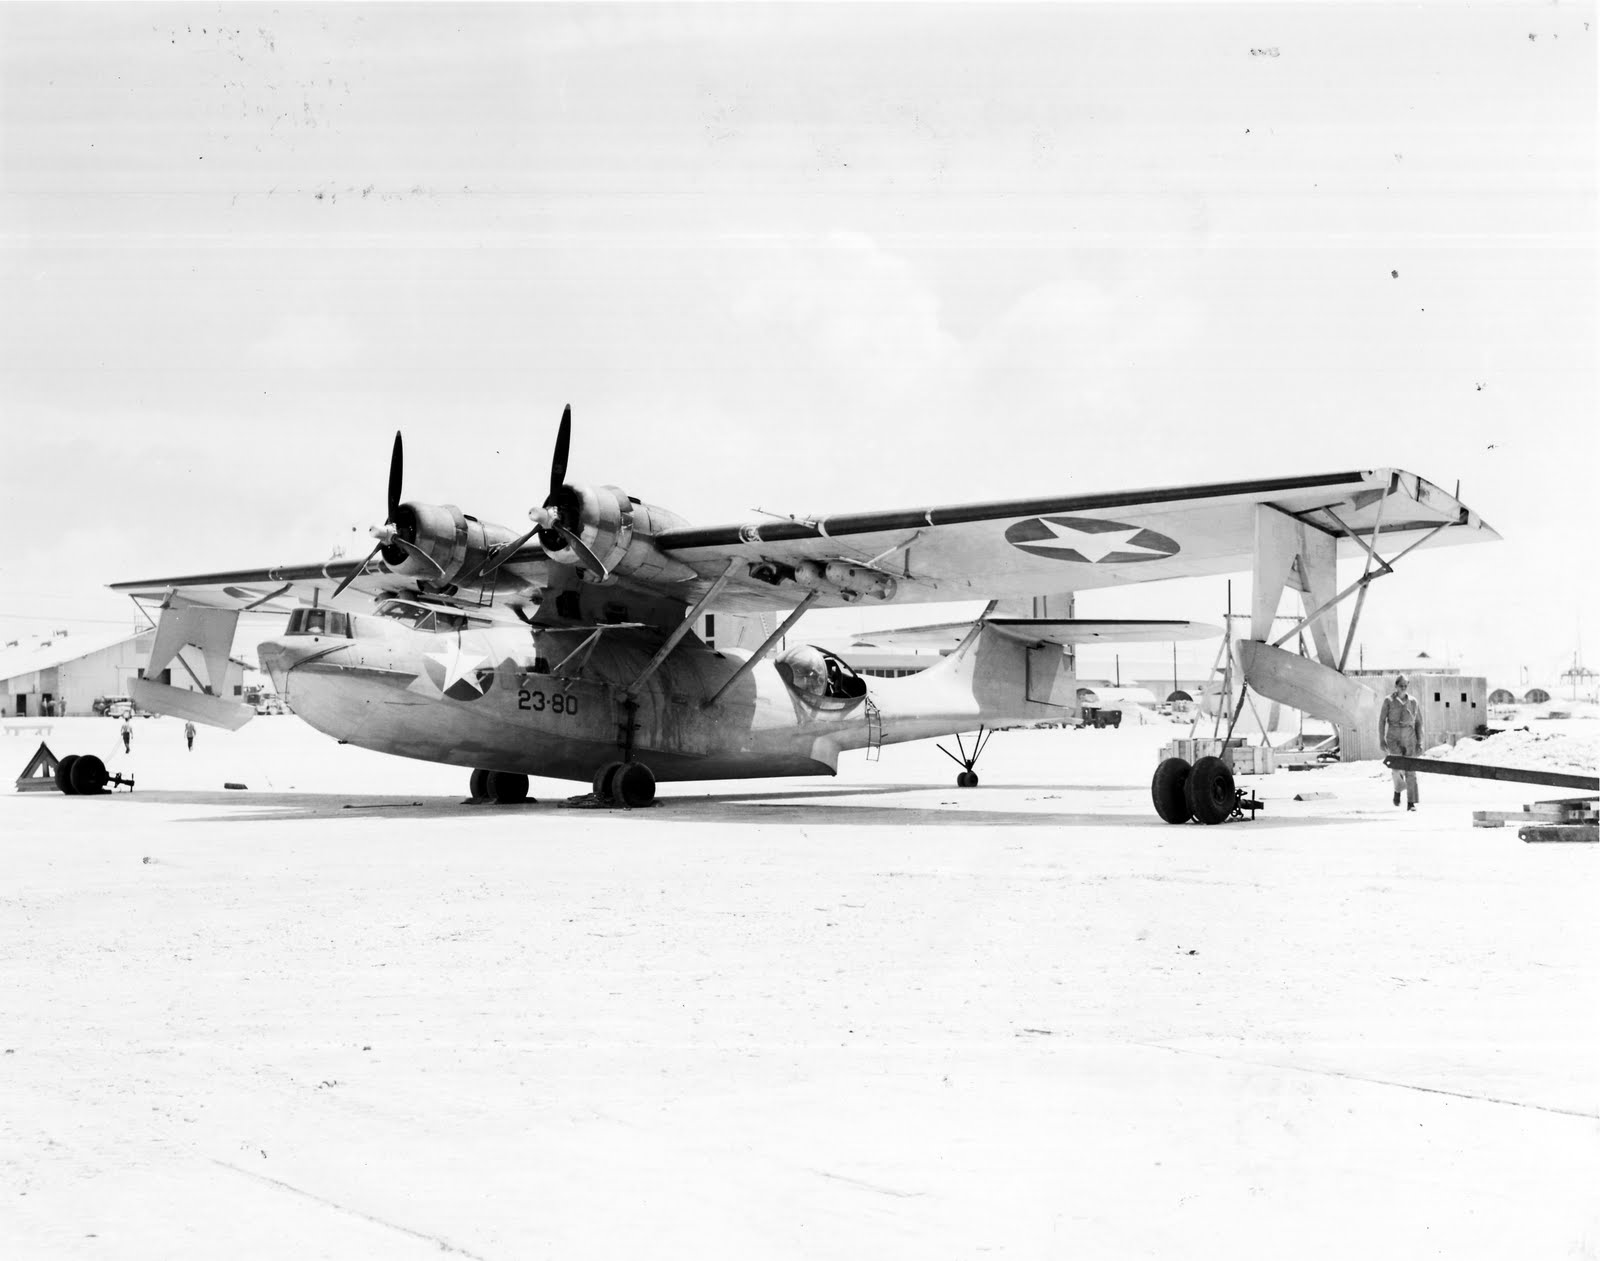 PBY-5 Catalina of Patrol Squadron 23 on Sand Island, Midway, 1942. Note the depth bombs loaded under the wings.